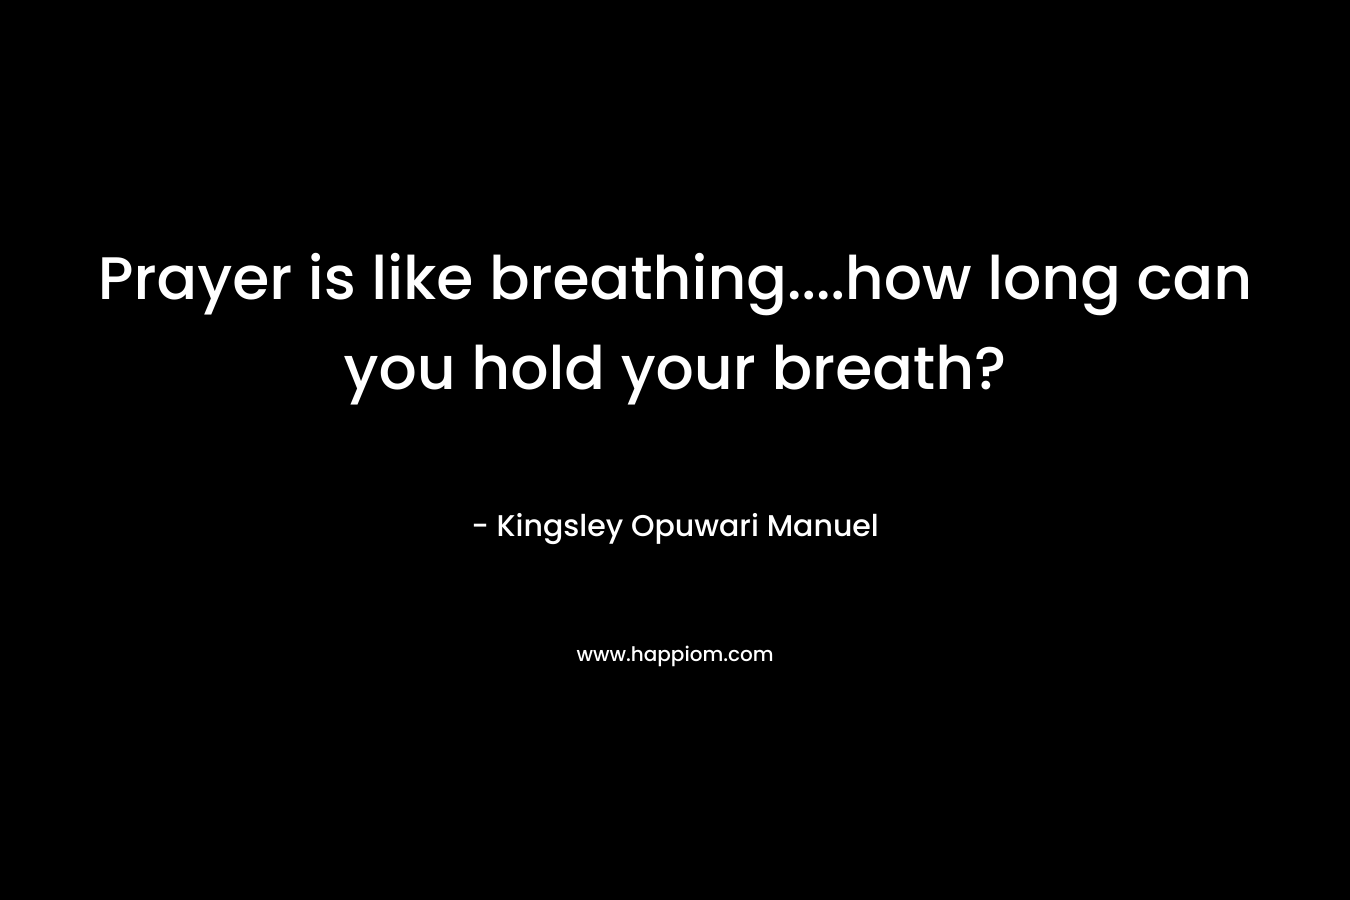 Prayer is like breathing....how long can you hold your breath?